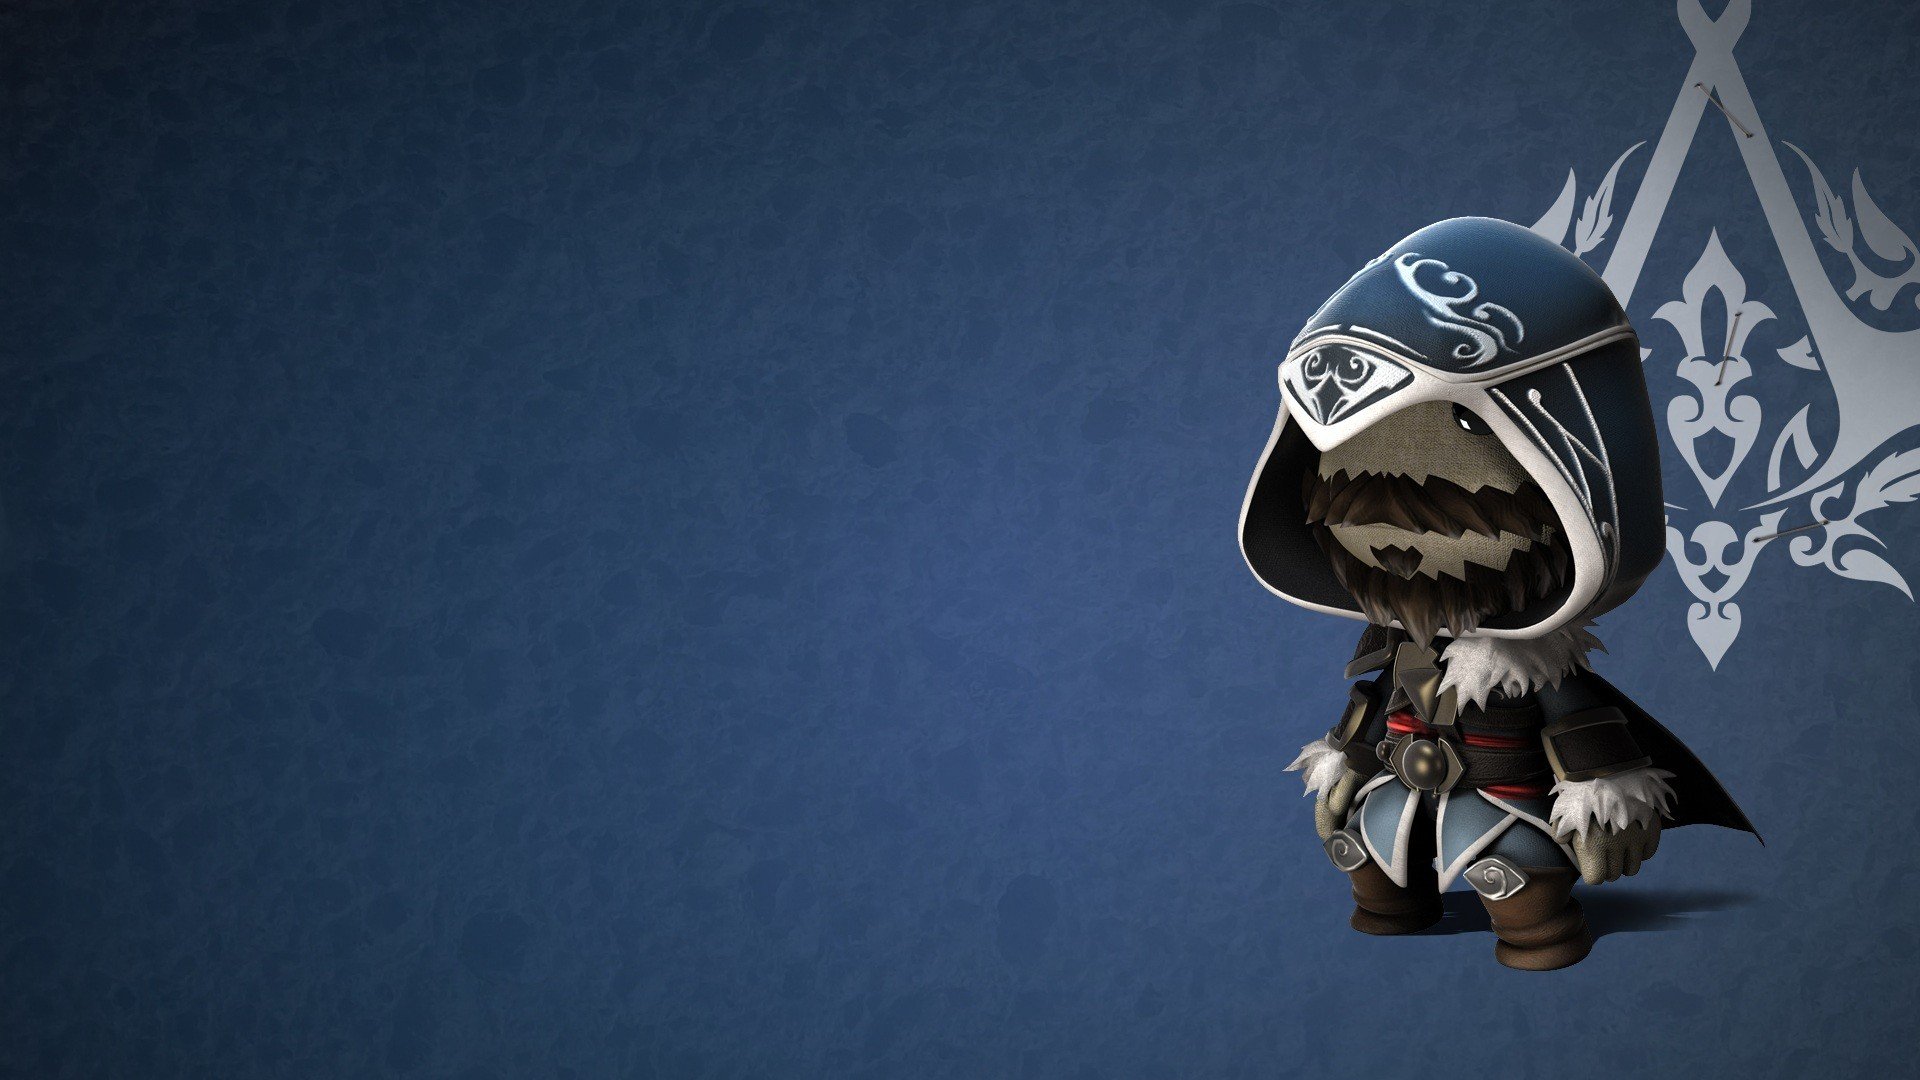  Creed Sackboy LBP PS3 hd wallpaper background   HD Wallpapers 1920x1080